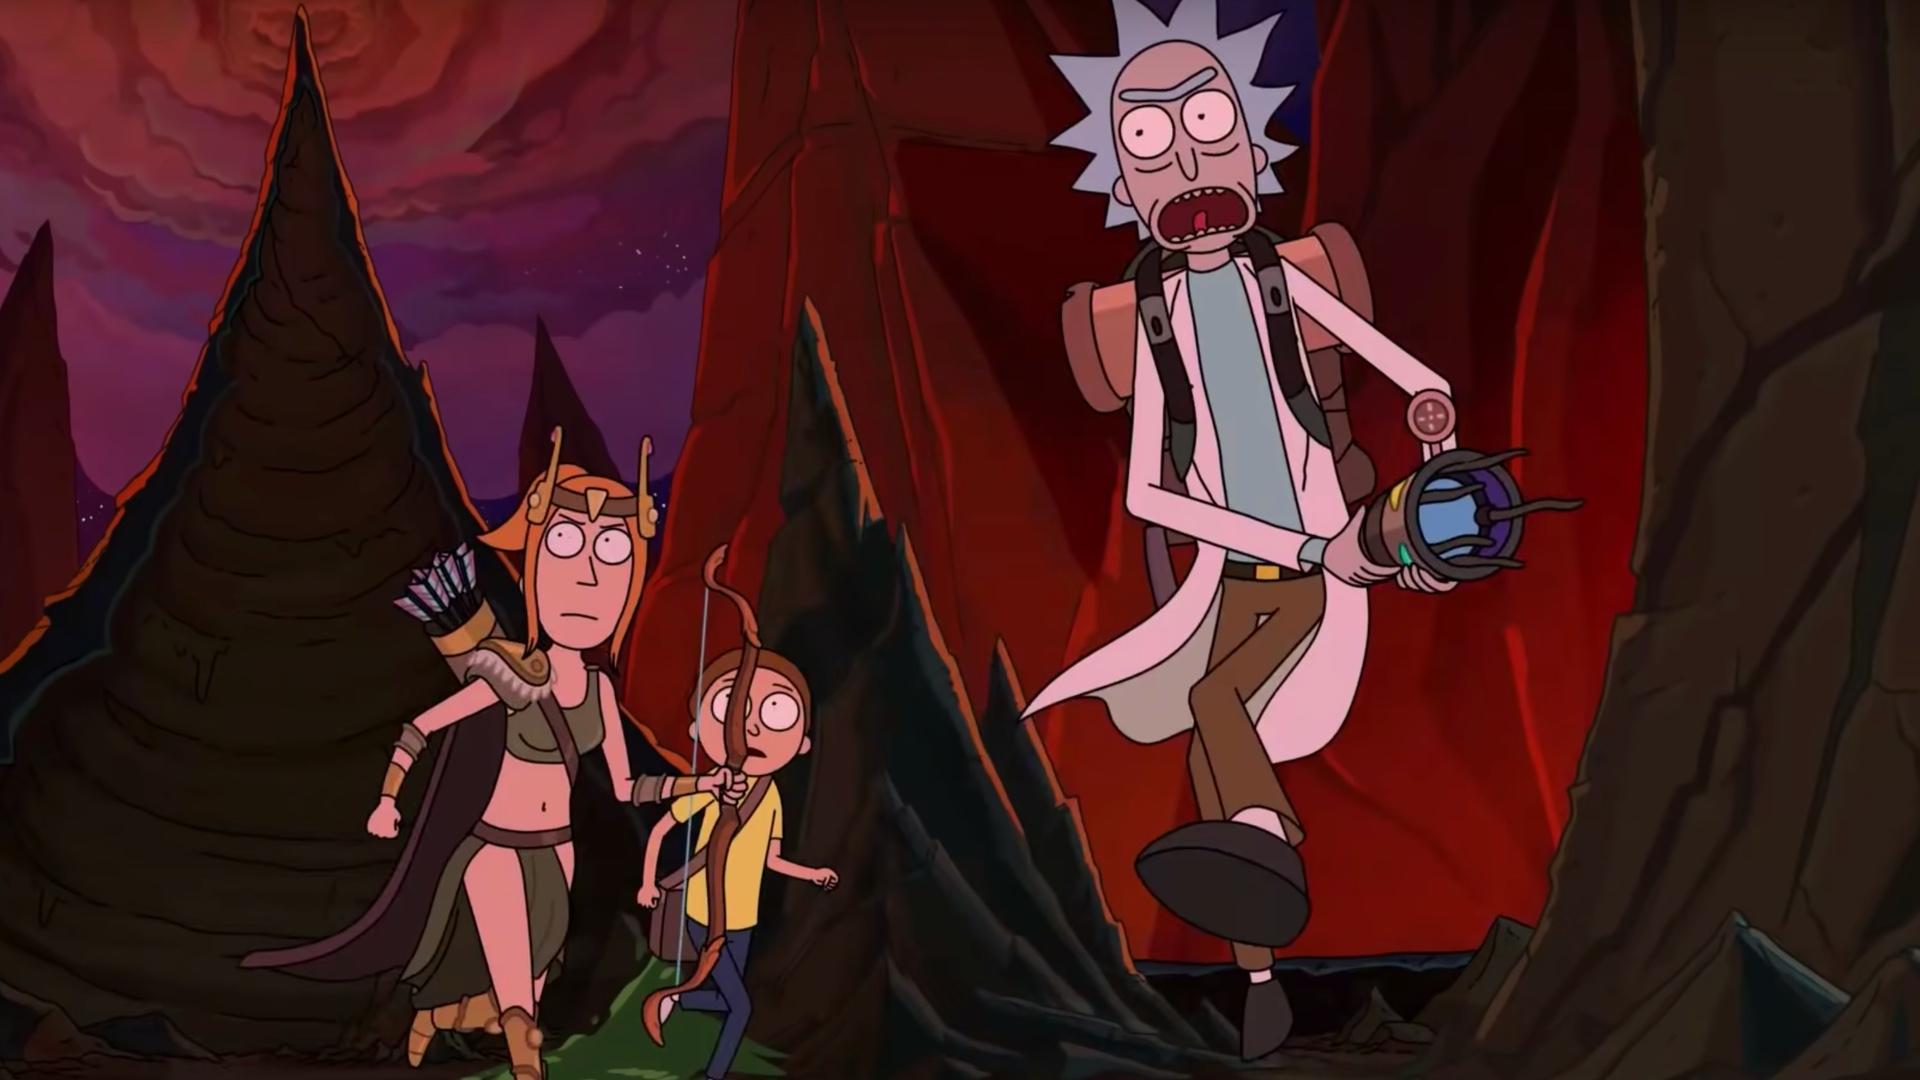 RICK AND MORTY Season 4 Episodes Get Brief But Funny